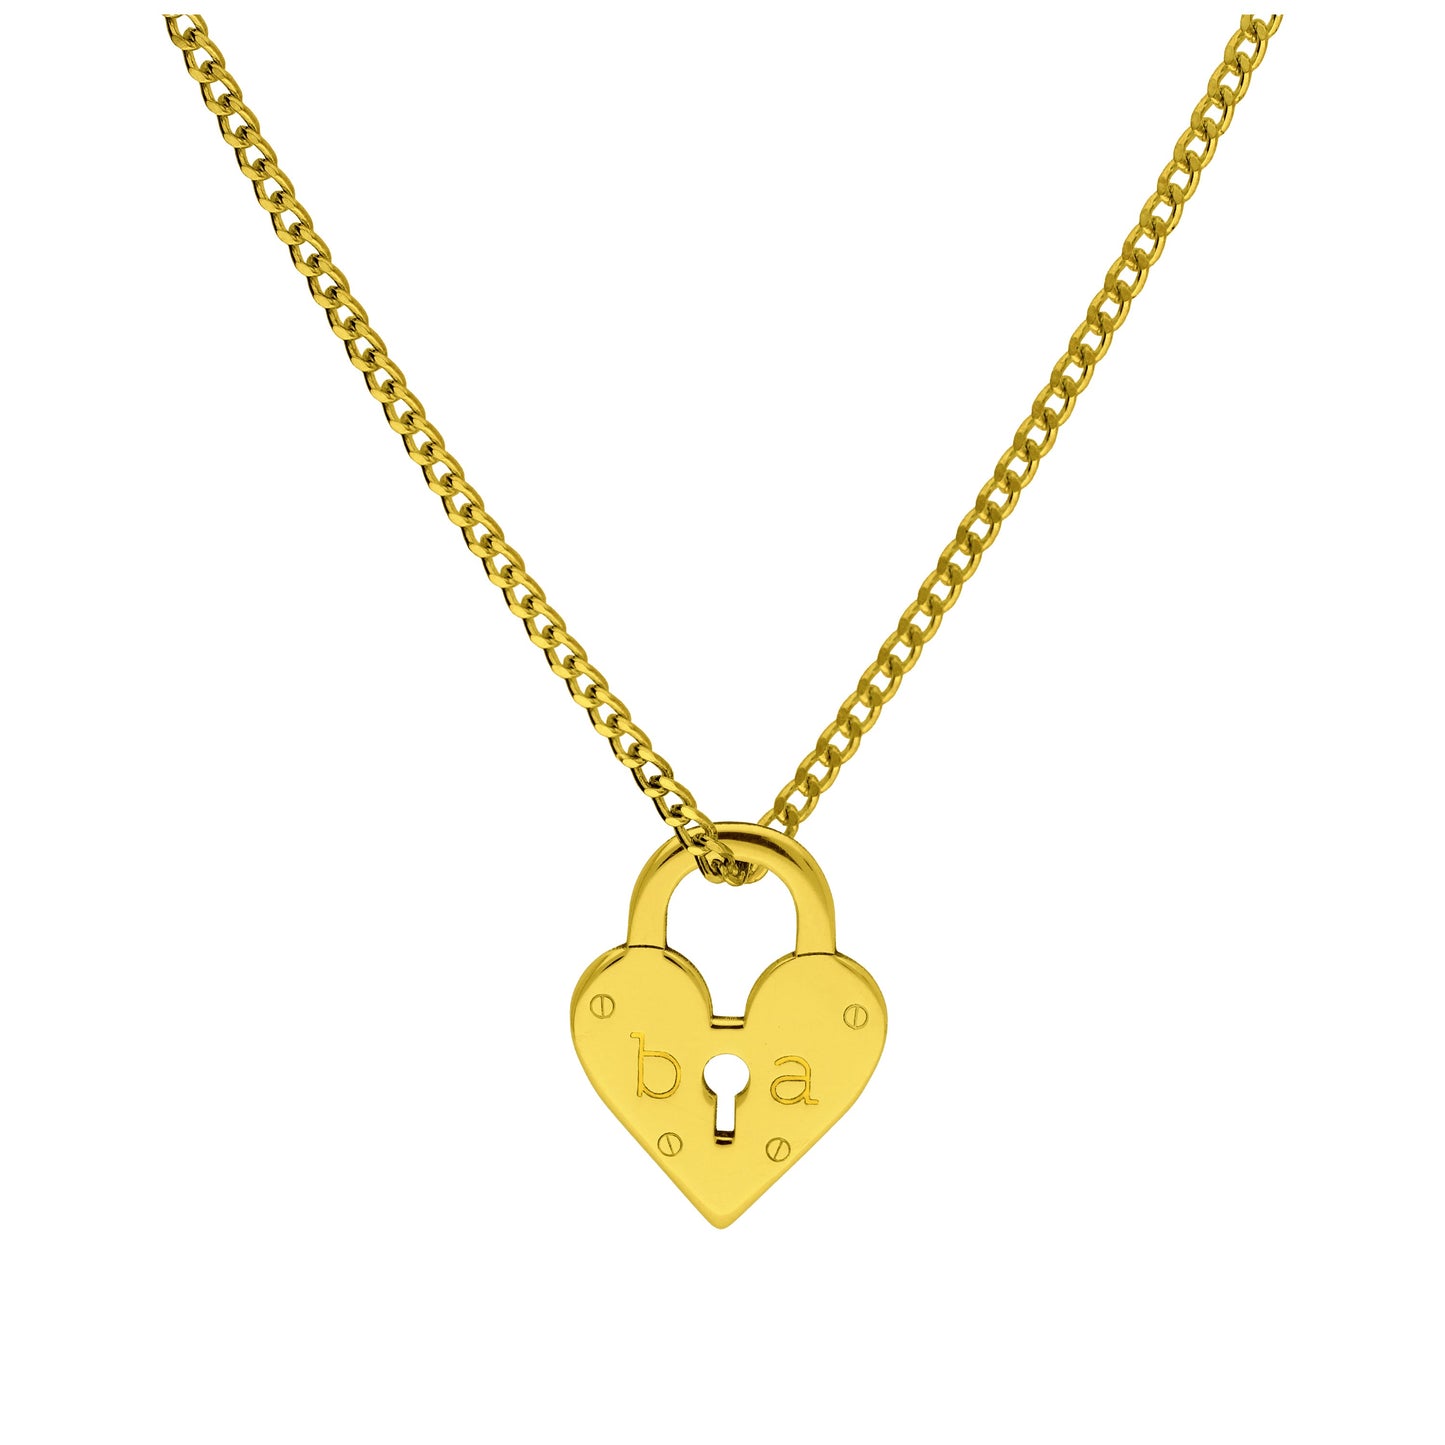 Bespoke Gold Plated Sterling Silver Initials Heart Padlock Necklace 16 - 24 Inches